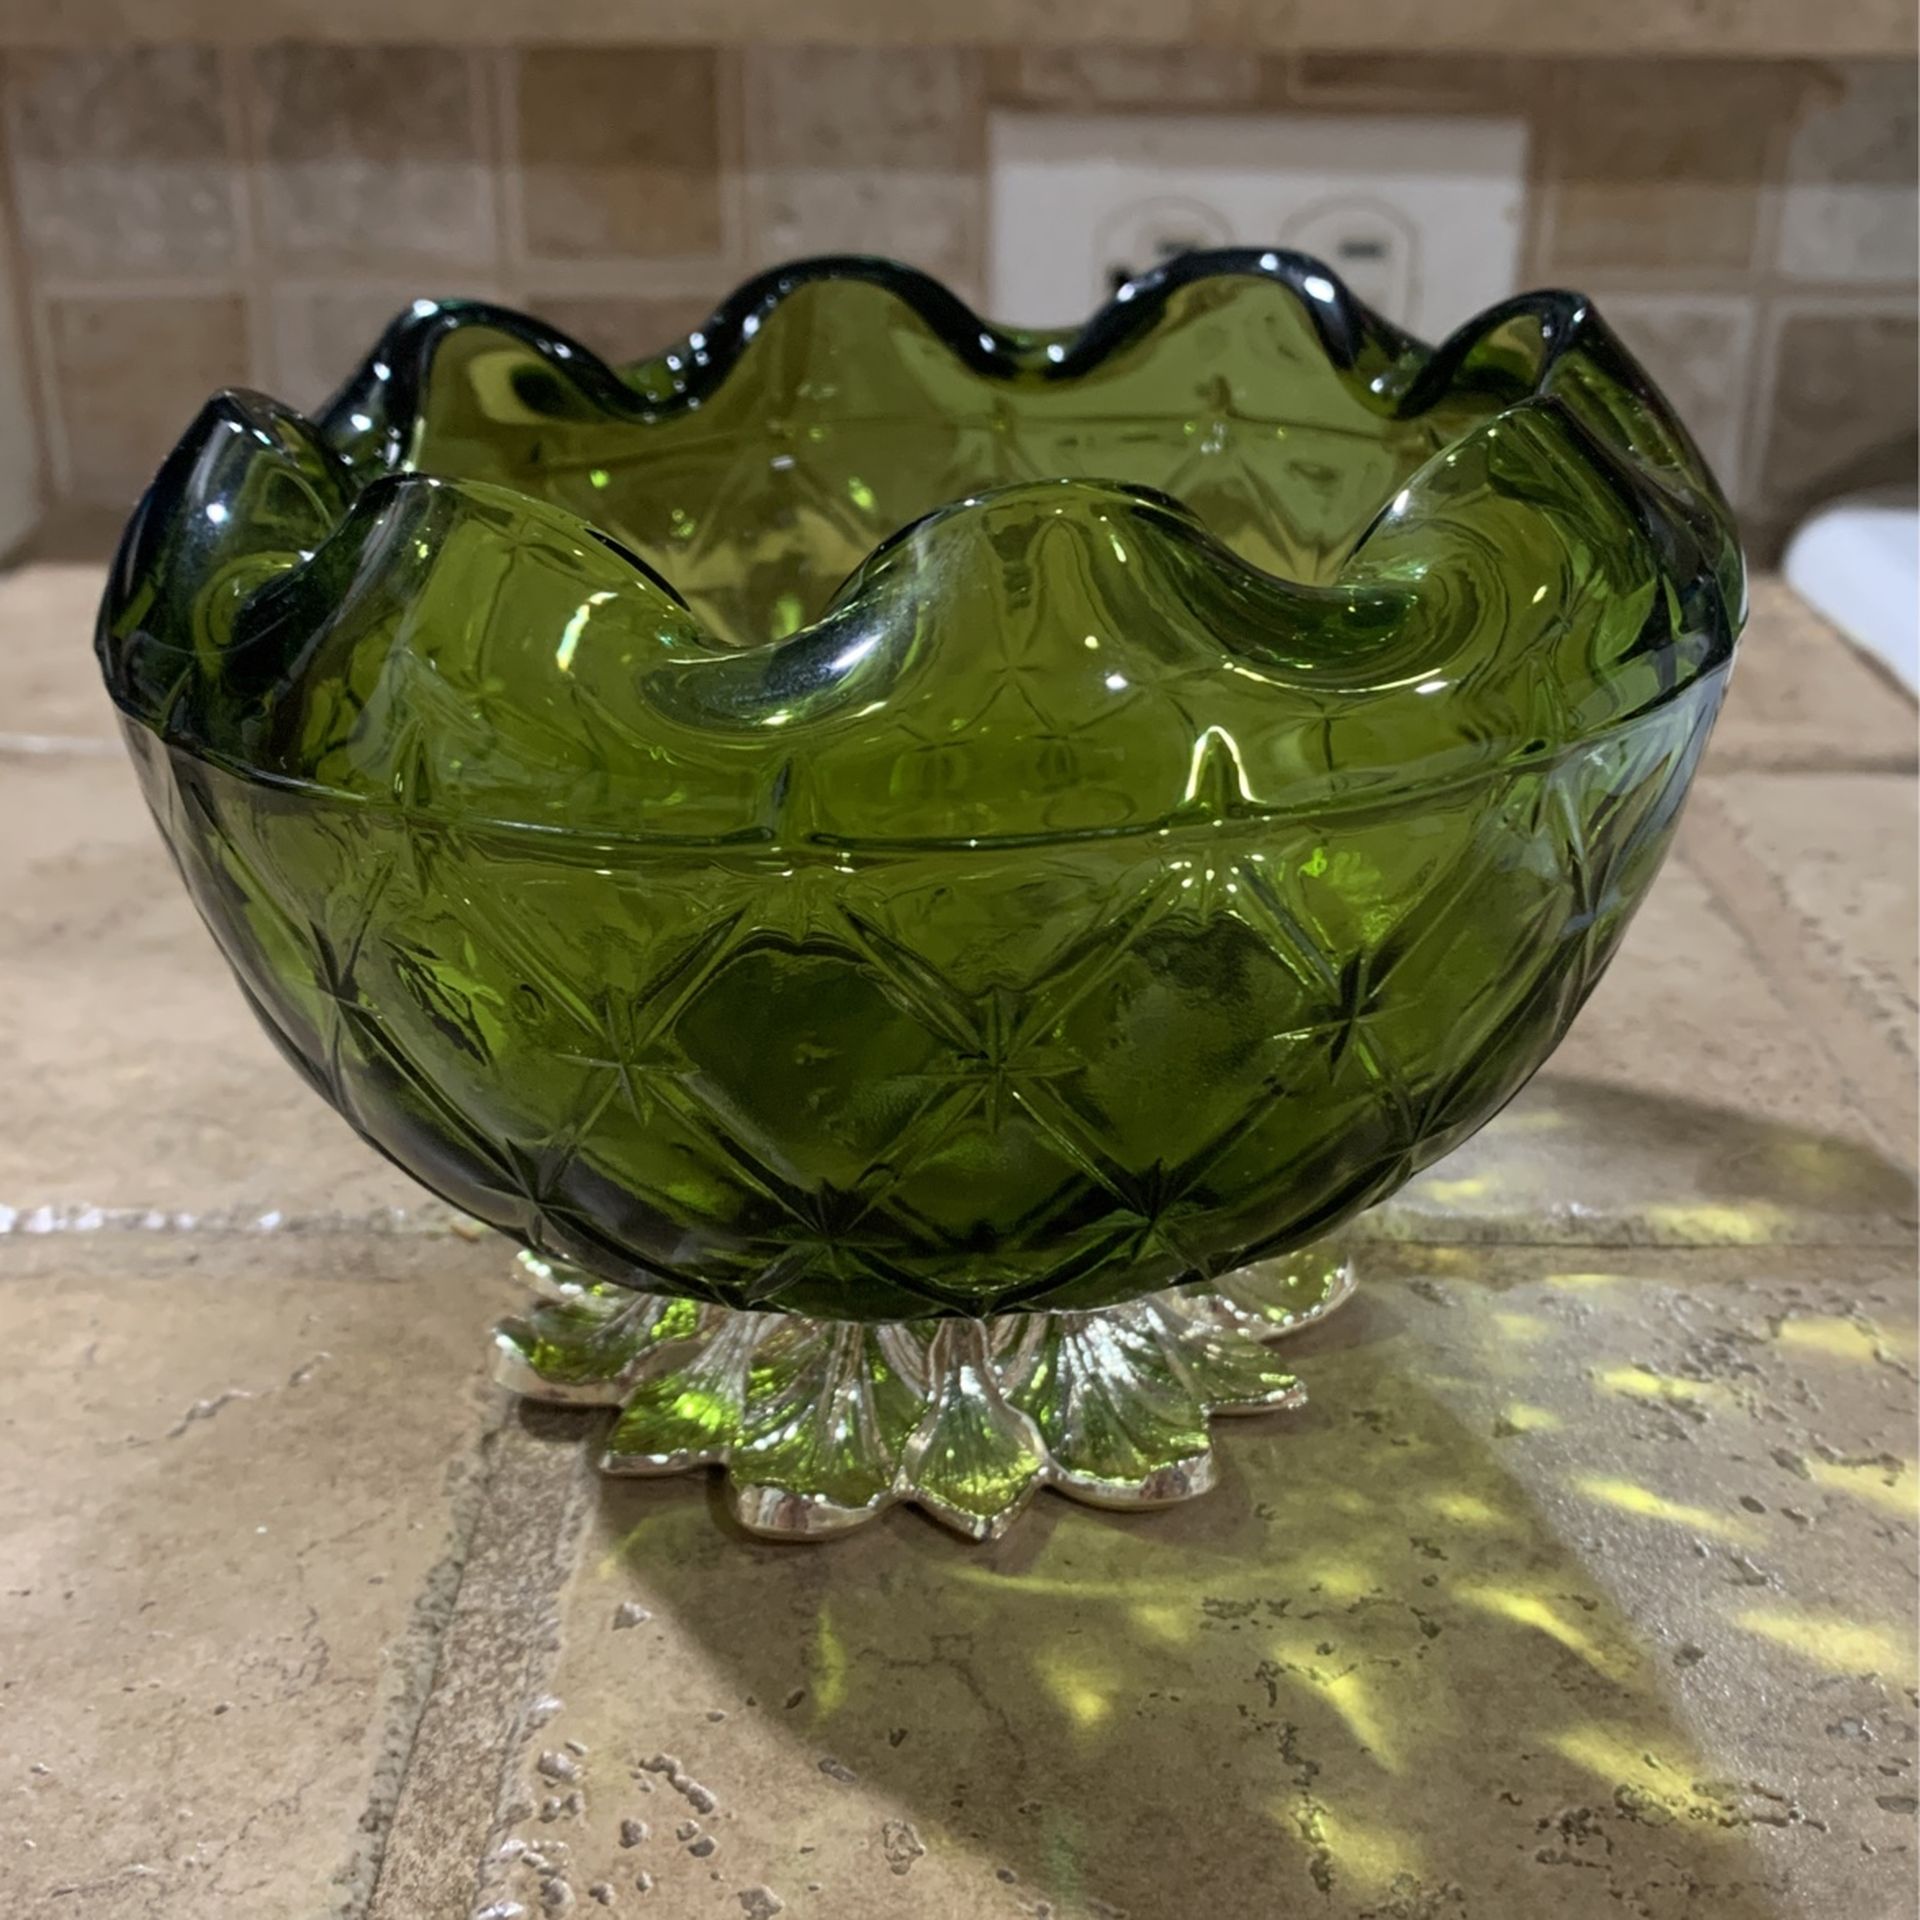 Vintage Green Indiana Glass Ruffle-Edged Dish with Pedestal Foot, Centerpiece Vessel